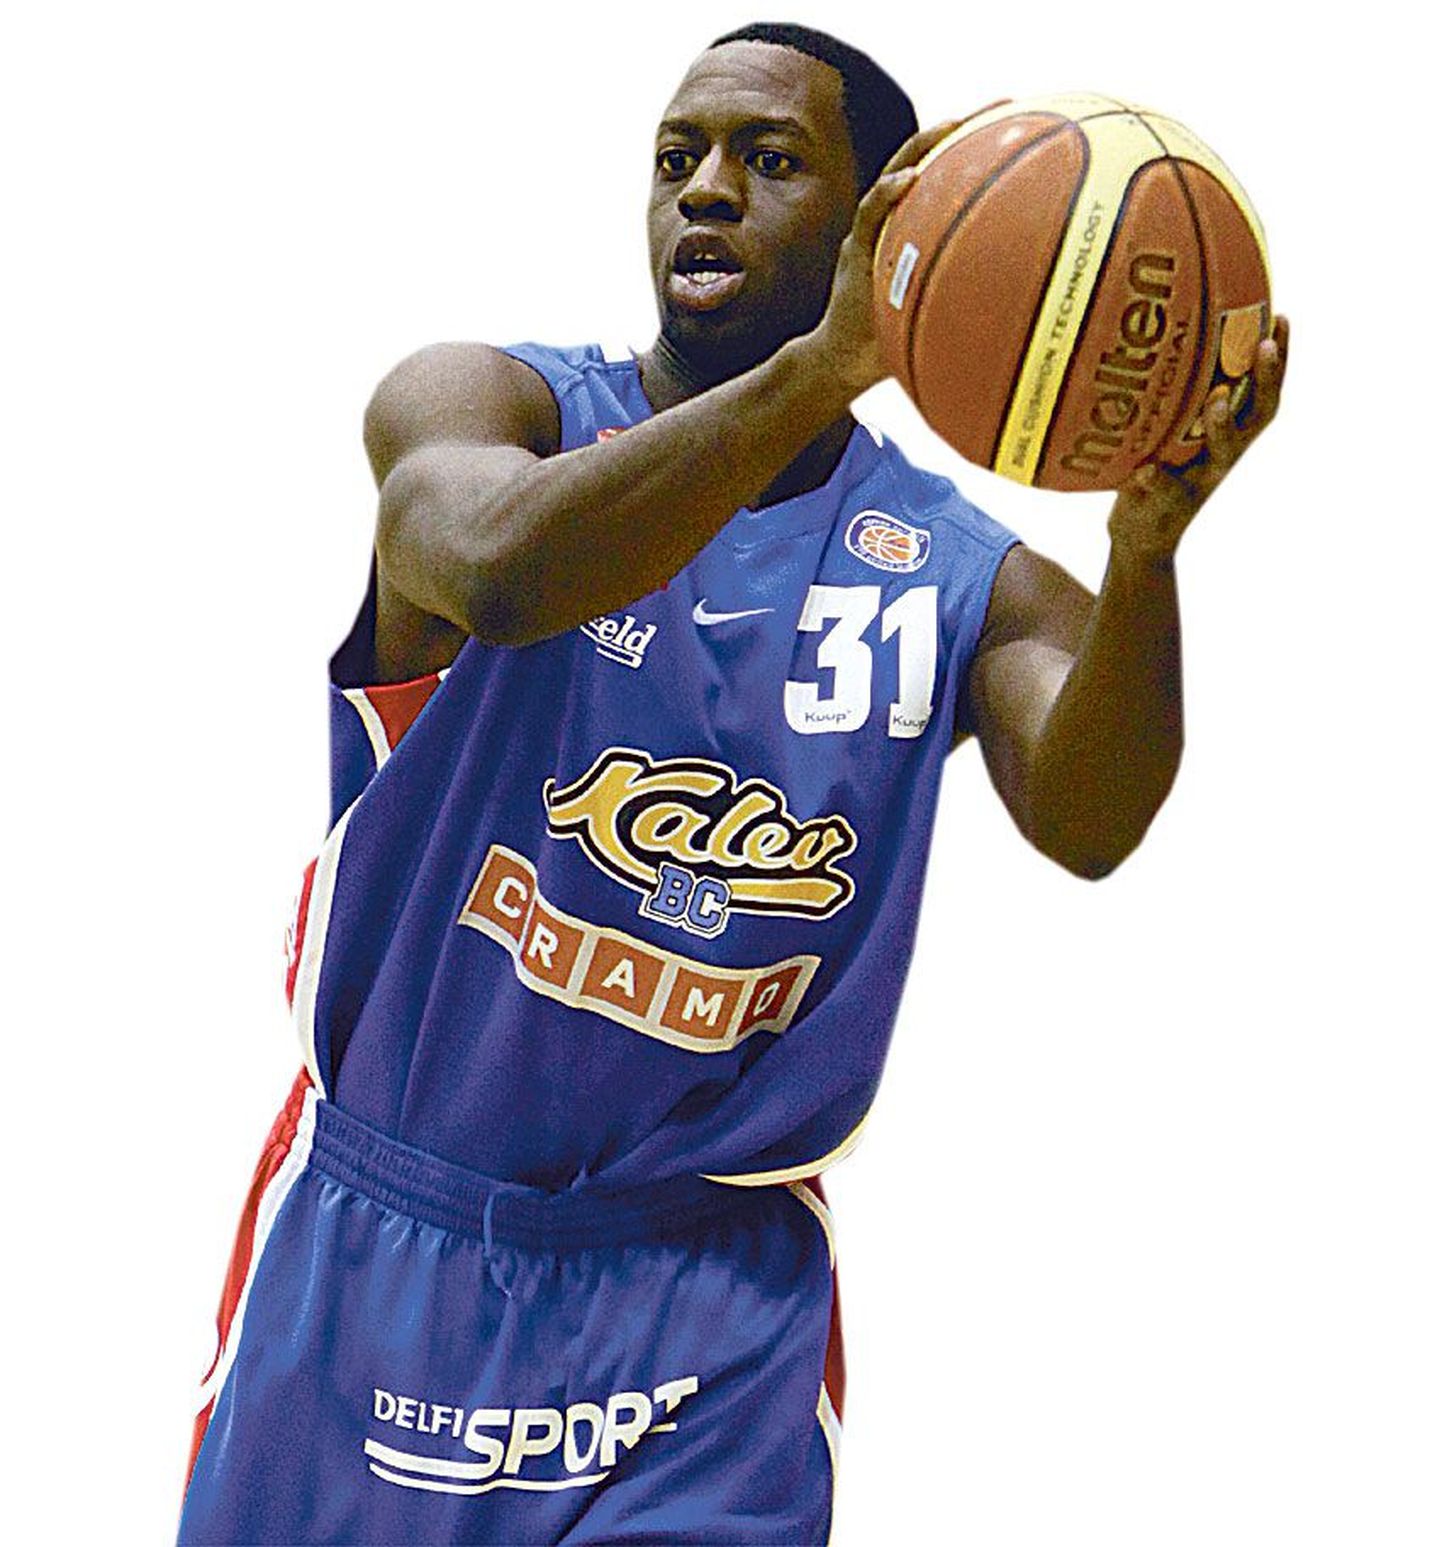 Kalev/Cramo tagamees Anthony Nelson.